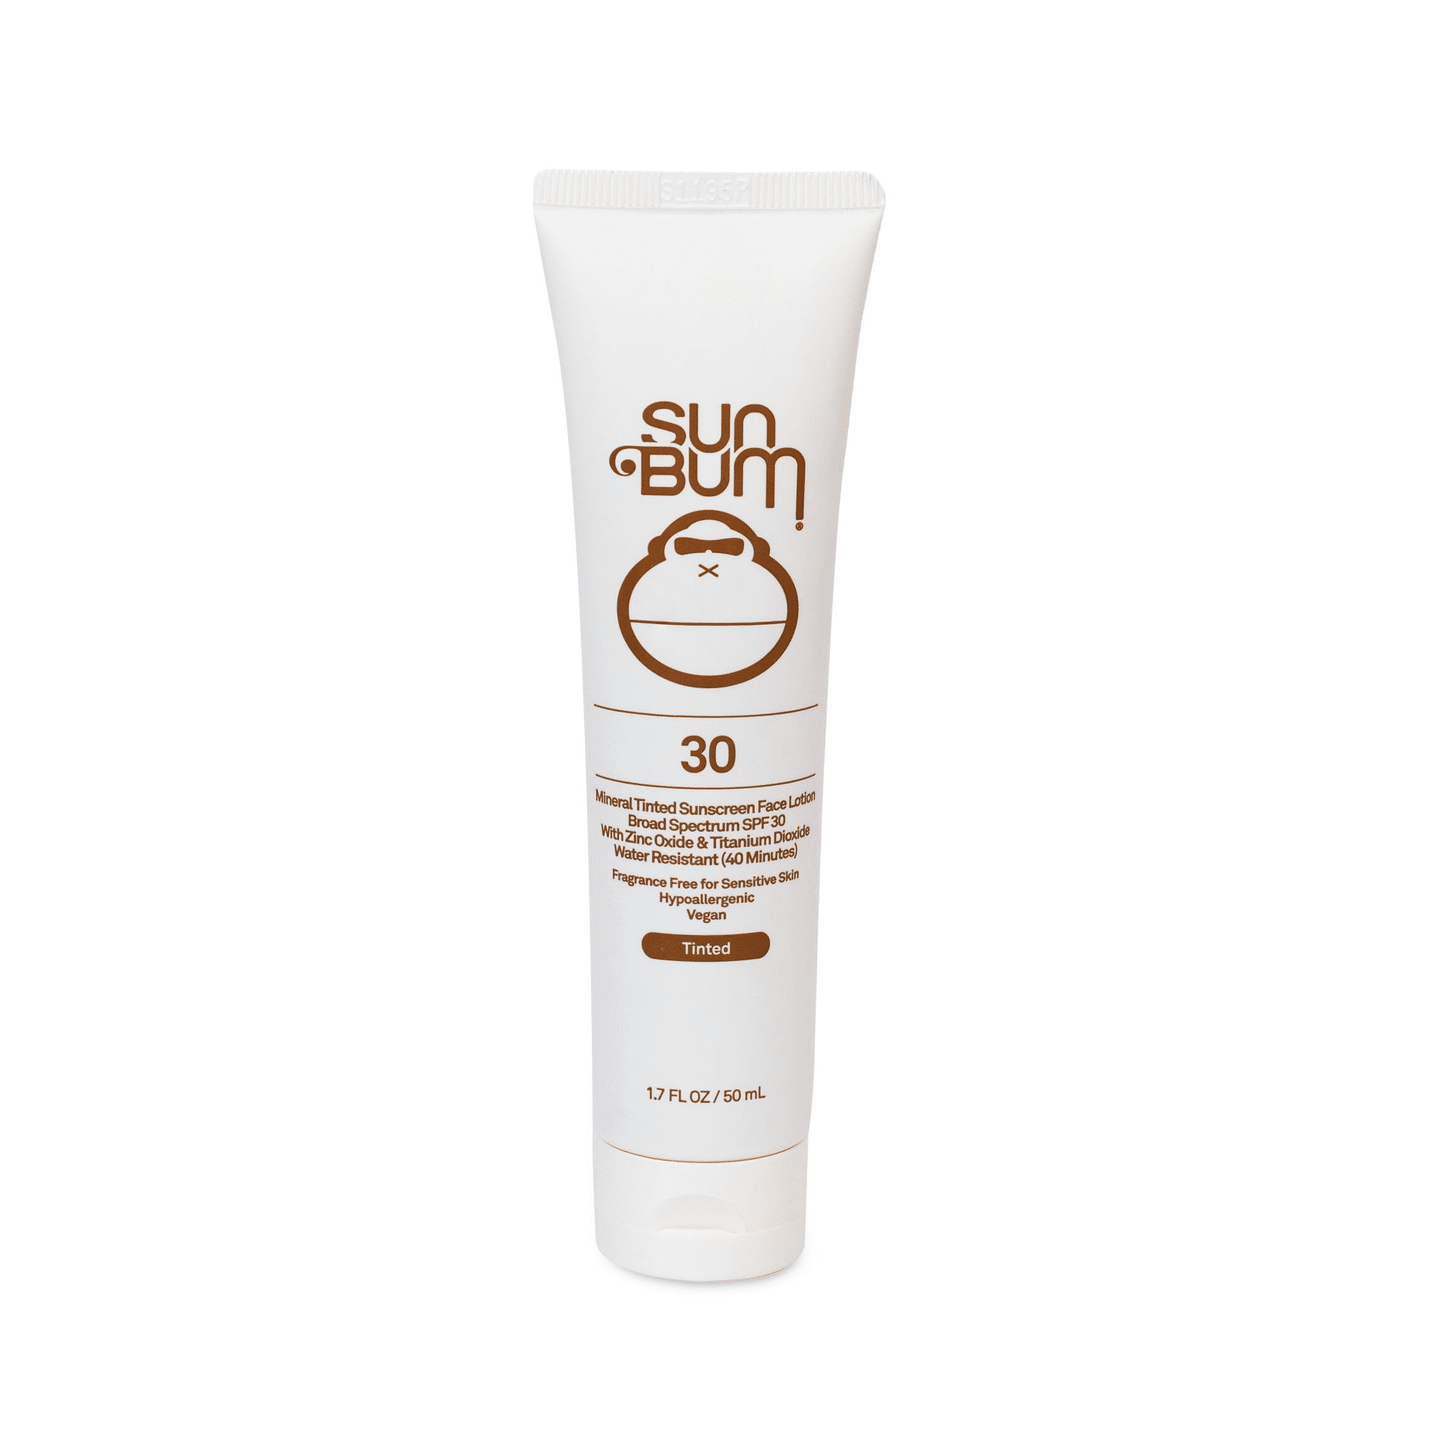 Sun Bum Mineral Tinted Lotion SPF30